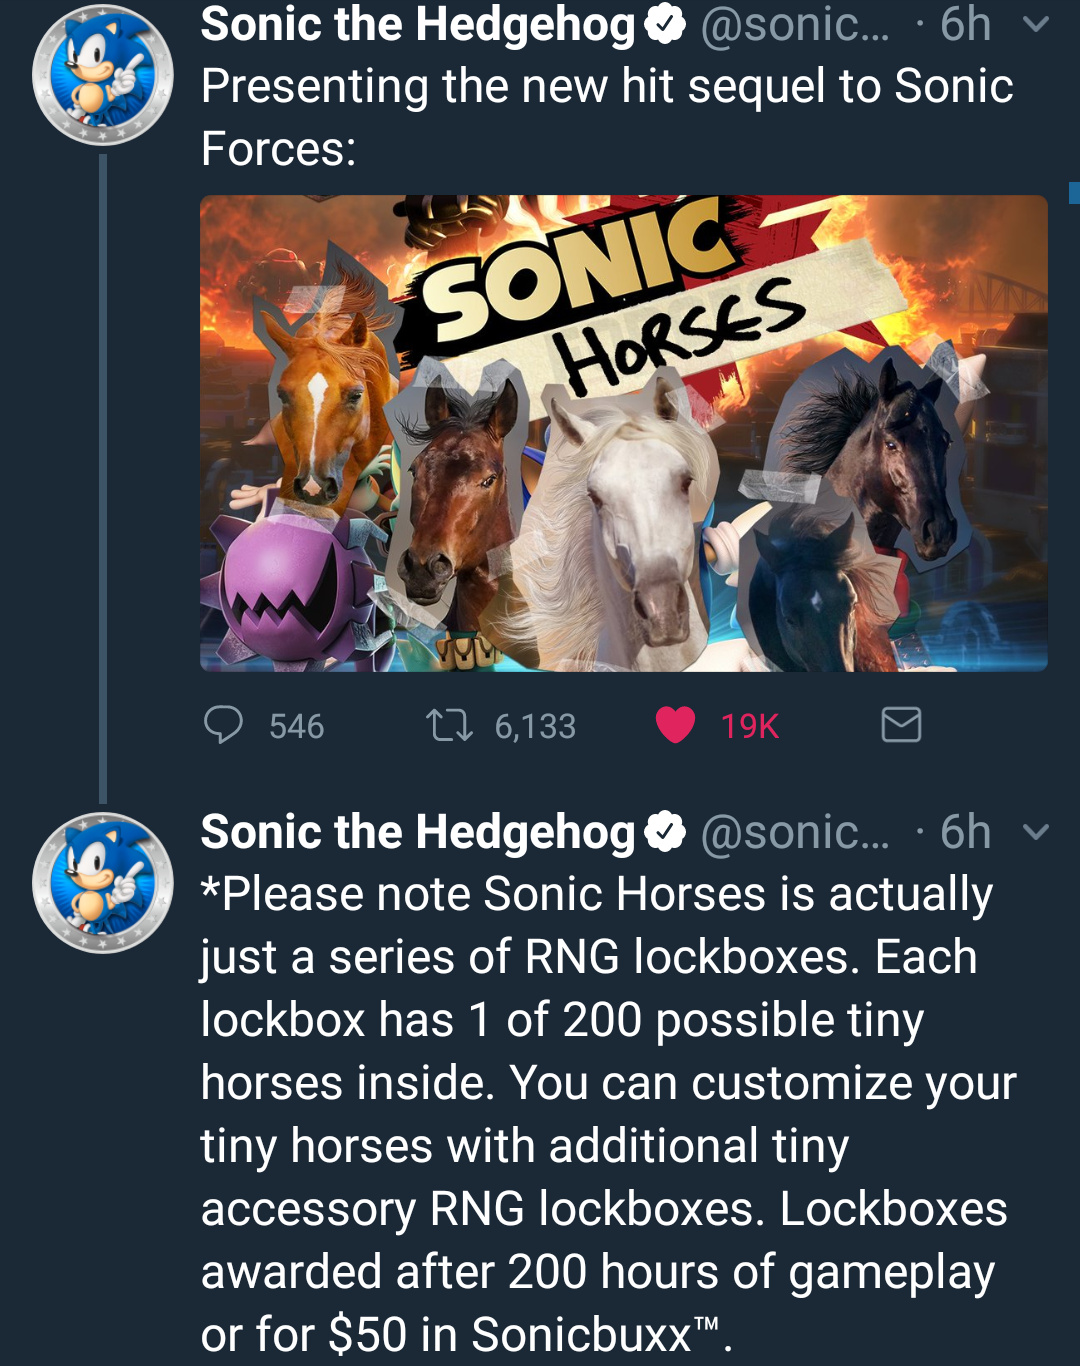 sonic horses twitter - Sonic the Hedgehog ... 6hv Presenting the new hit sequel to Sonic Forces Horses 546 12 6, Sonic the Hedgehog .... 6h Please note Sonic Horses is actually just a series of Rng lockboxes. Each lockbox has 1 of 200 possible tiny horses